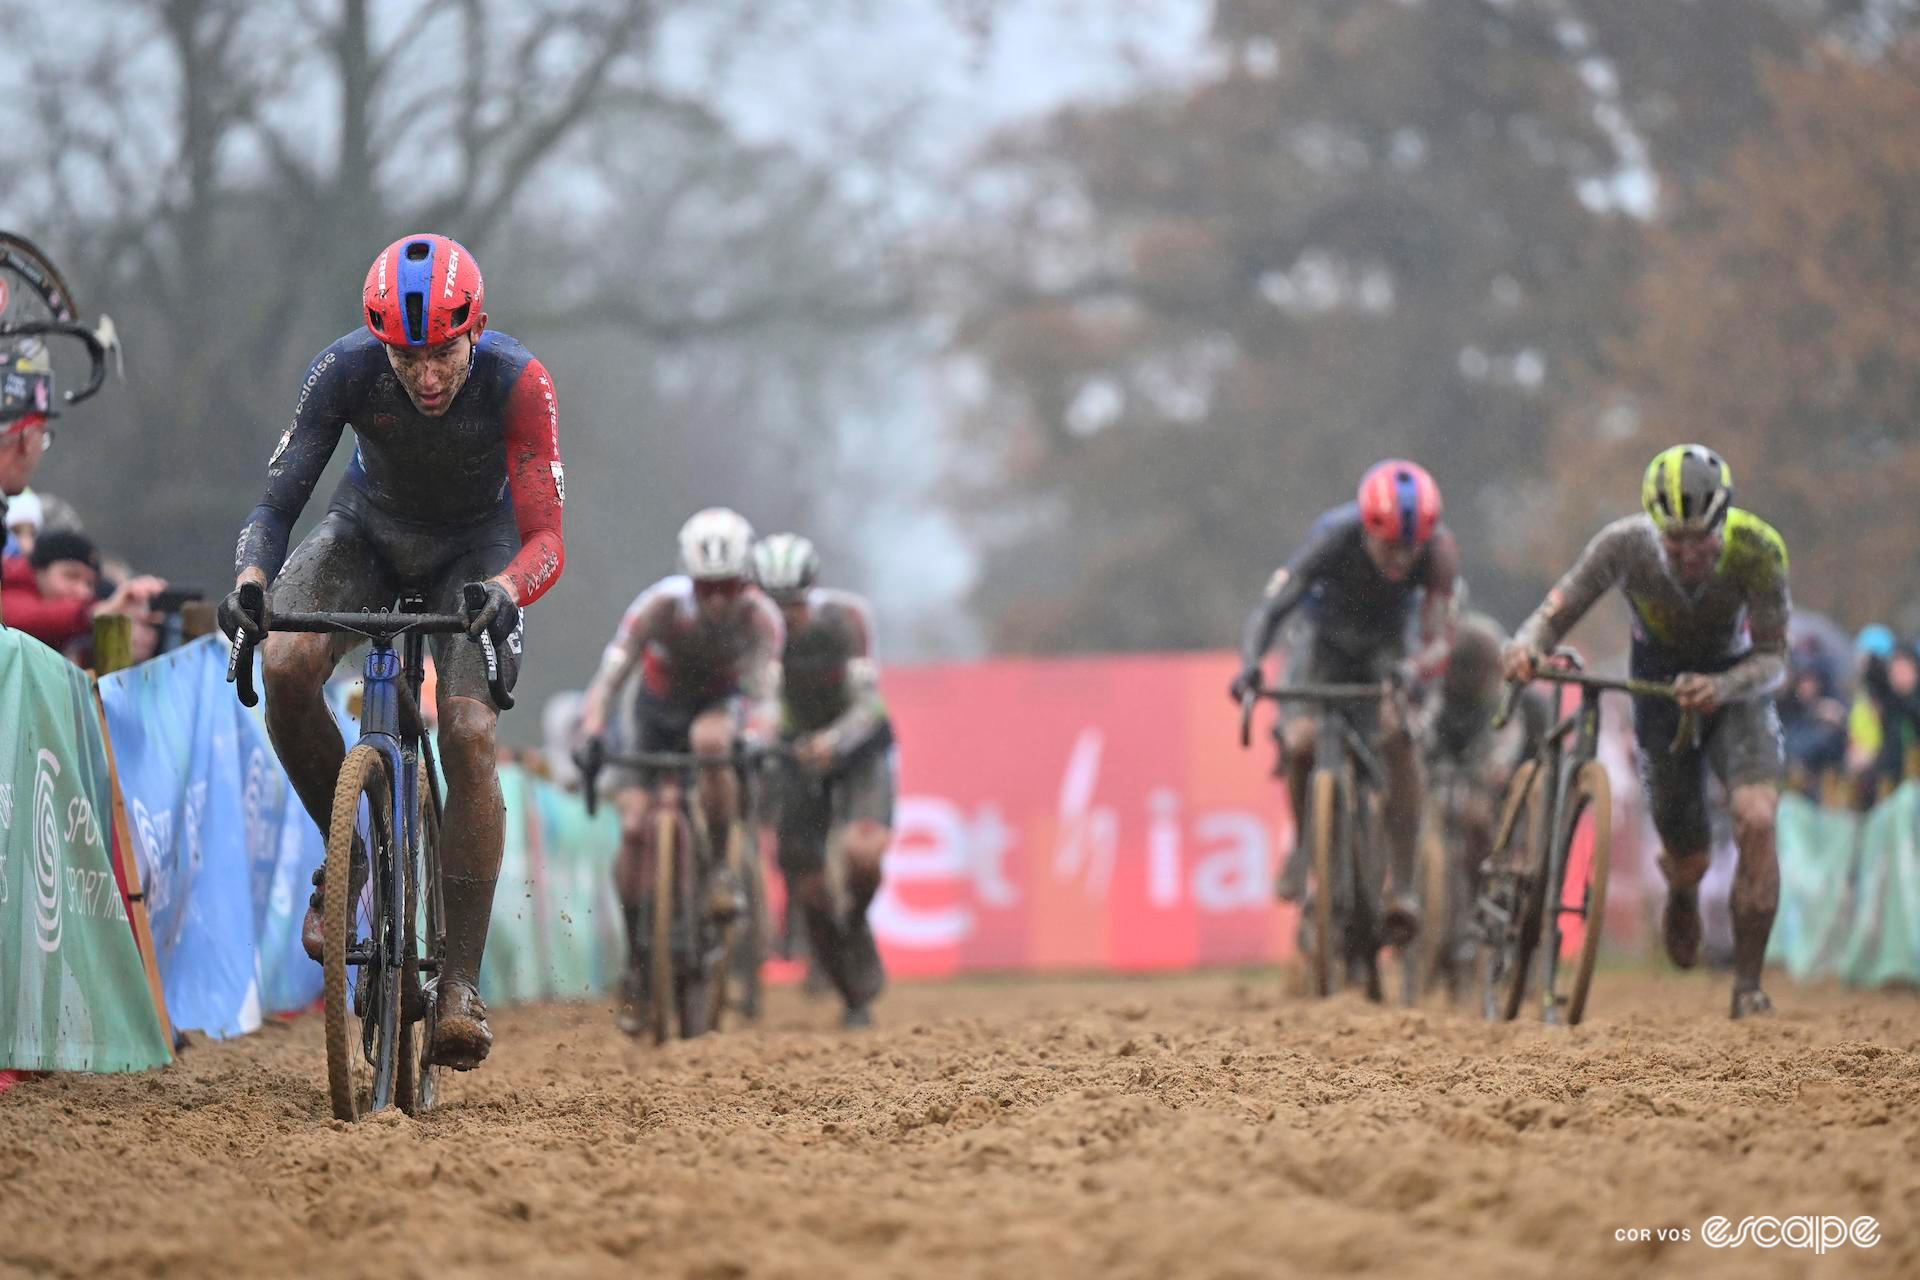 Thibau Nys rides up the righthand side (left of picture) of the sandpit a few seconds ahead of the chase group, some of them dismounting to run with their bikes early in CX World Cup Dublin.